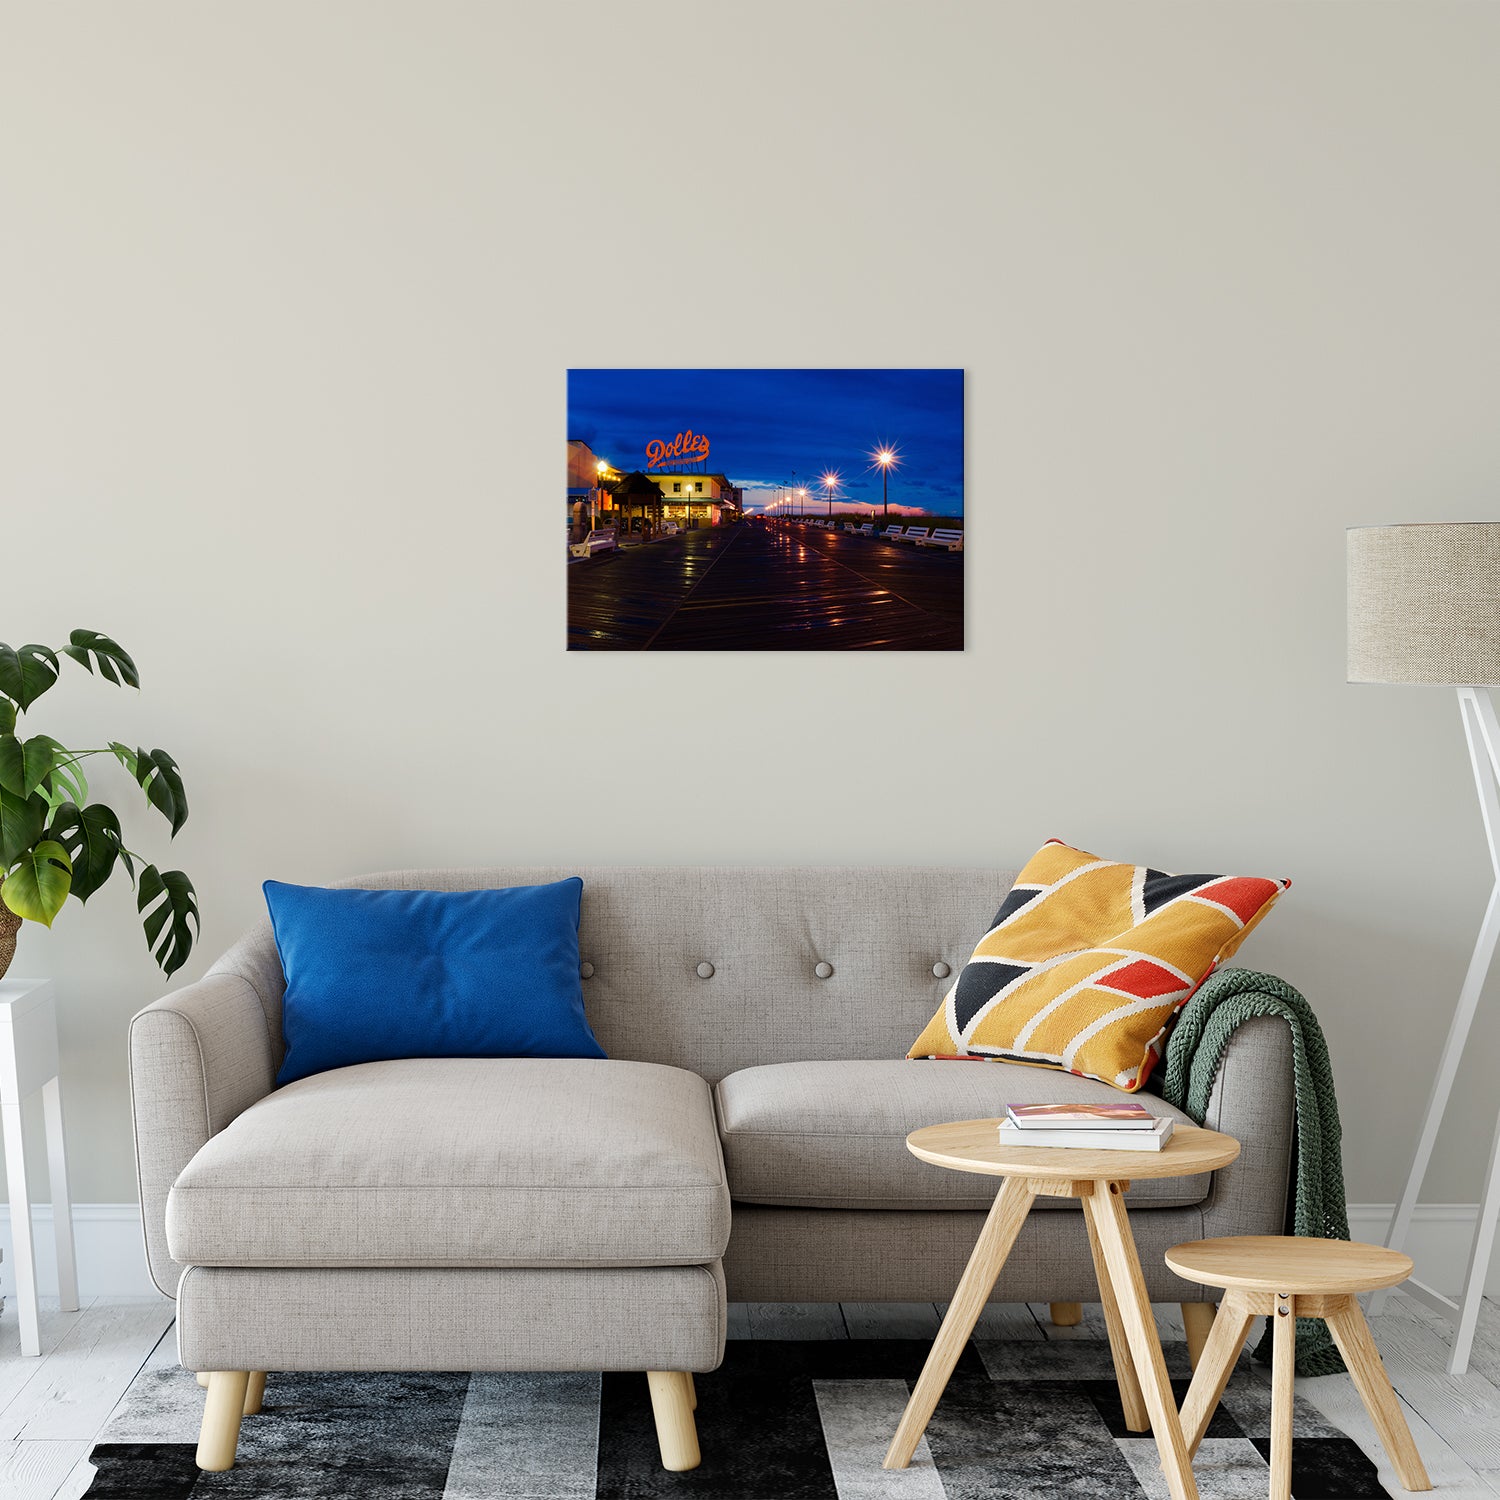 Early Morning at Dolles Night Photo Fine Art Canvas Wall Art Prints 20" x 30" / Fine Art Canvas - PIPAFINEART